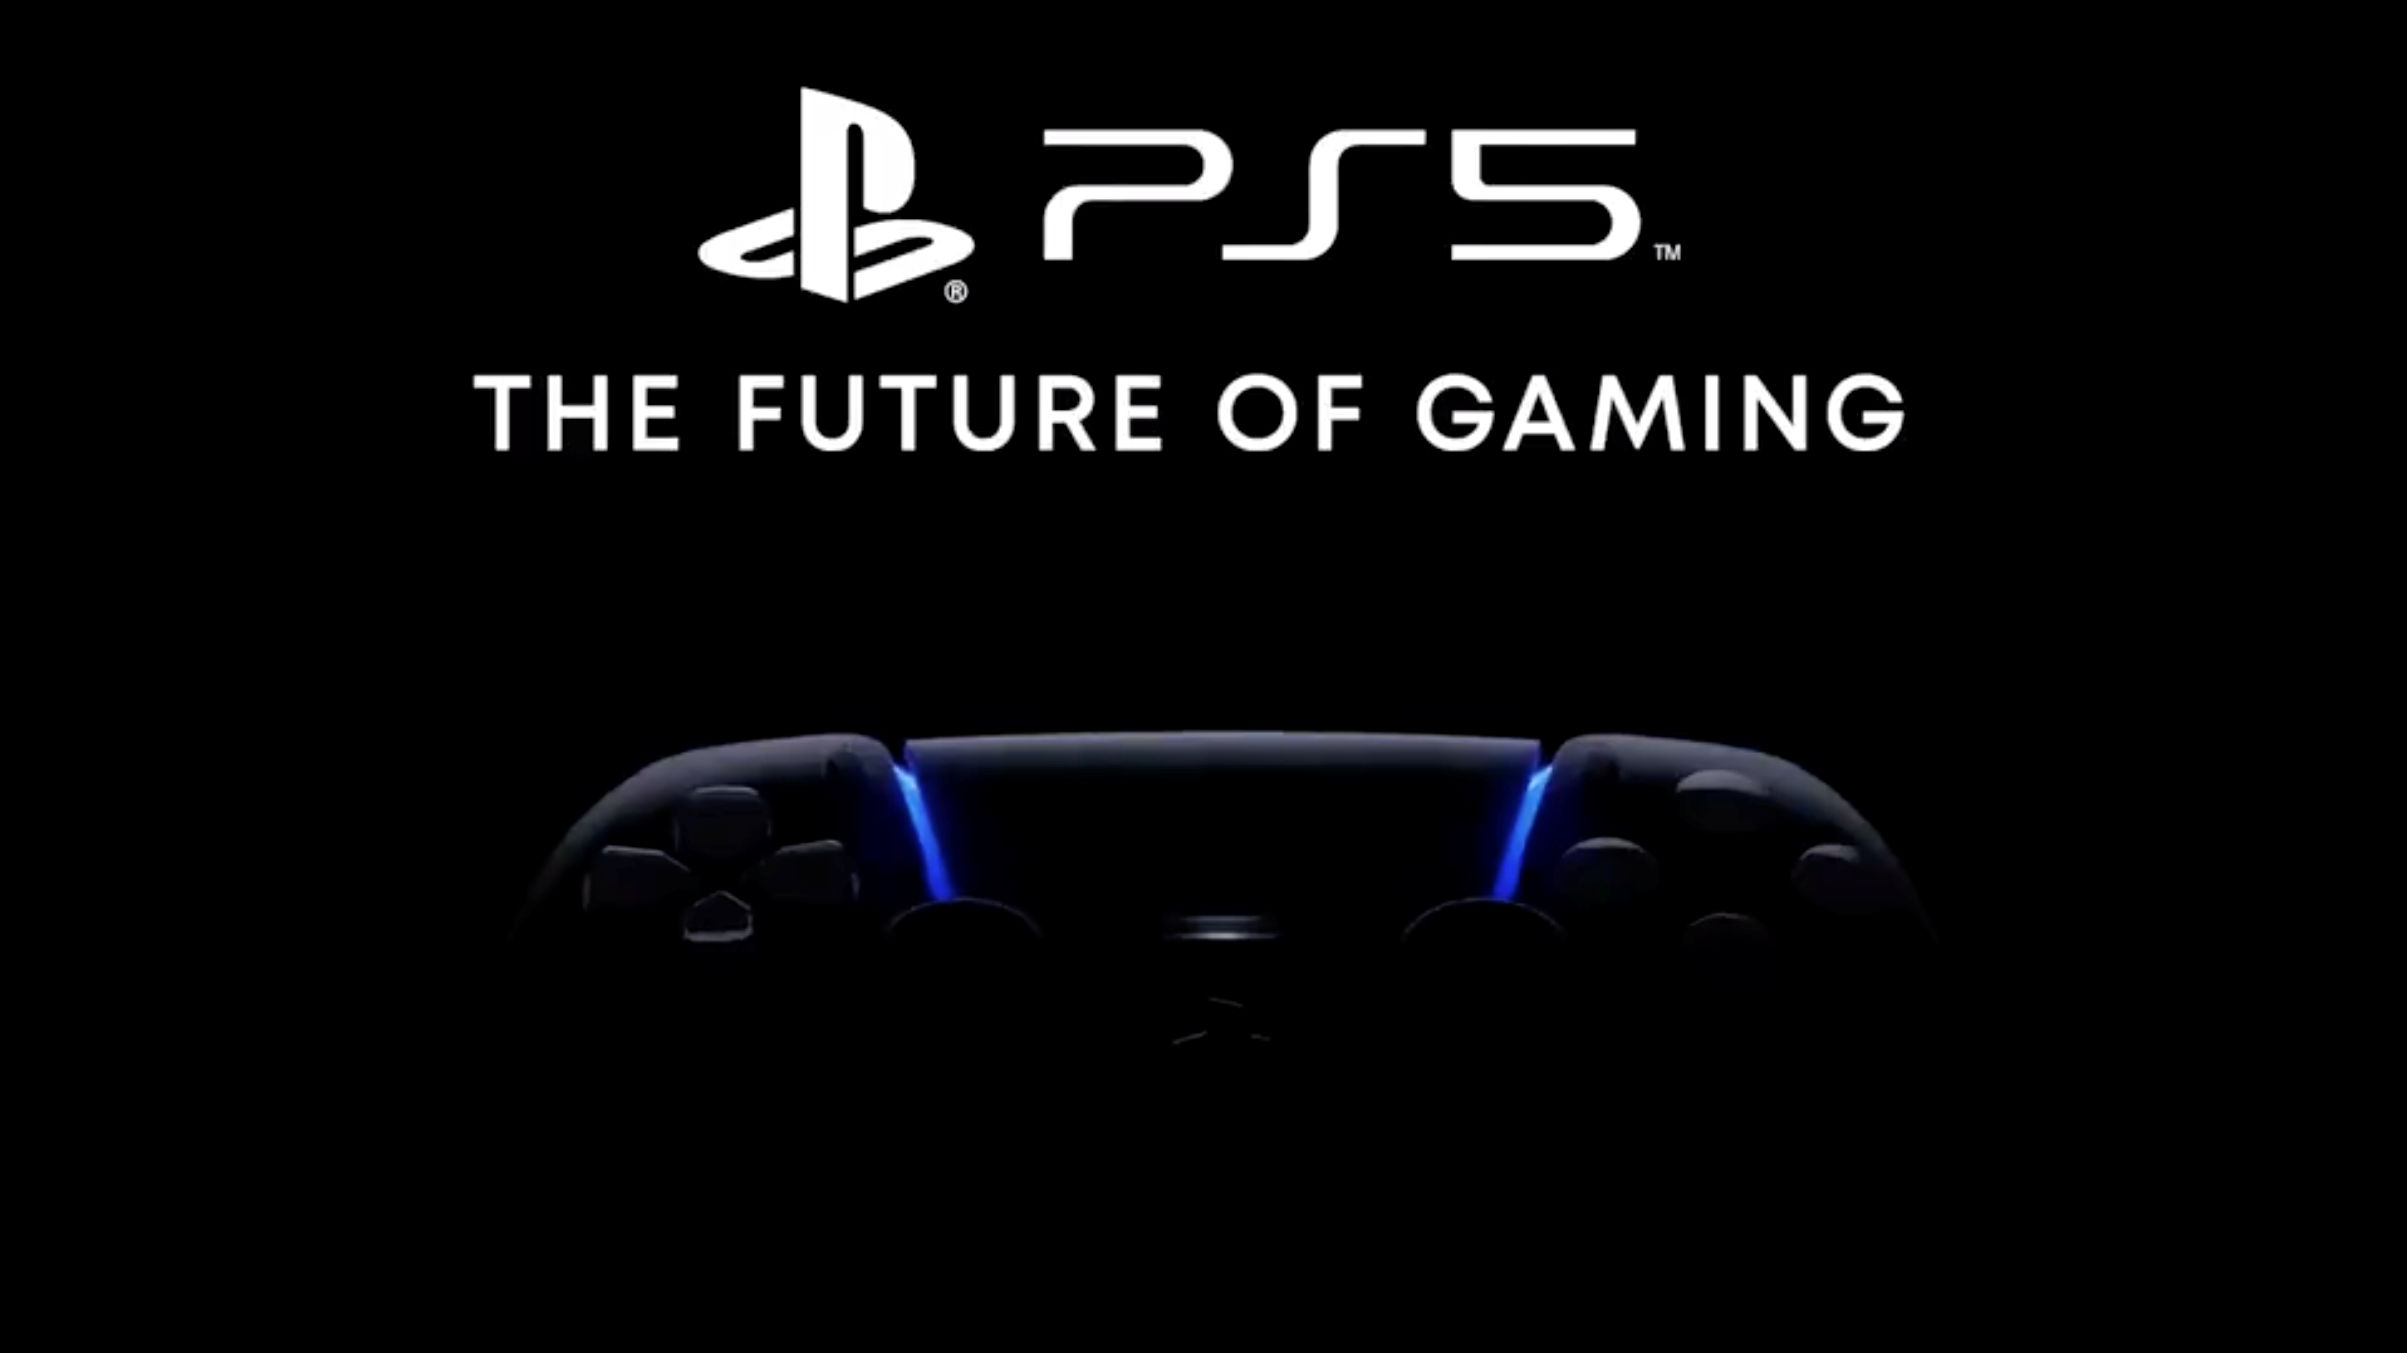 PS5 Can Either Do 4K 60 FPS or With Ray Tracing, But Not Both at Once, First Reviews Suggest - MySmartPrice